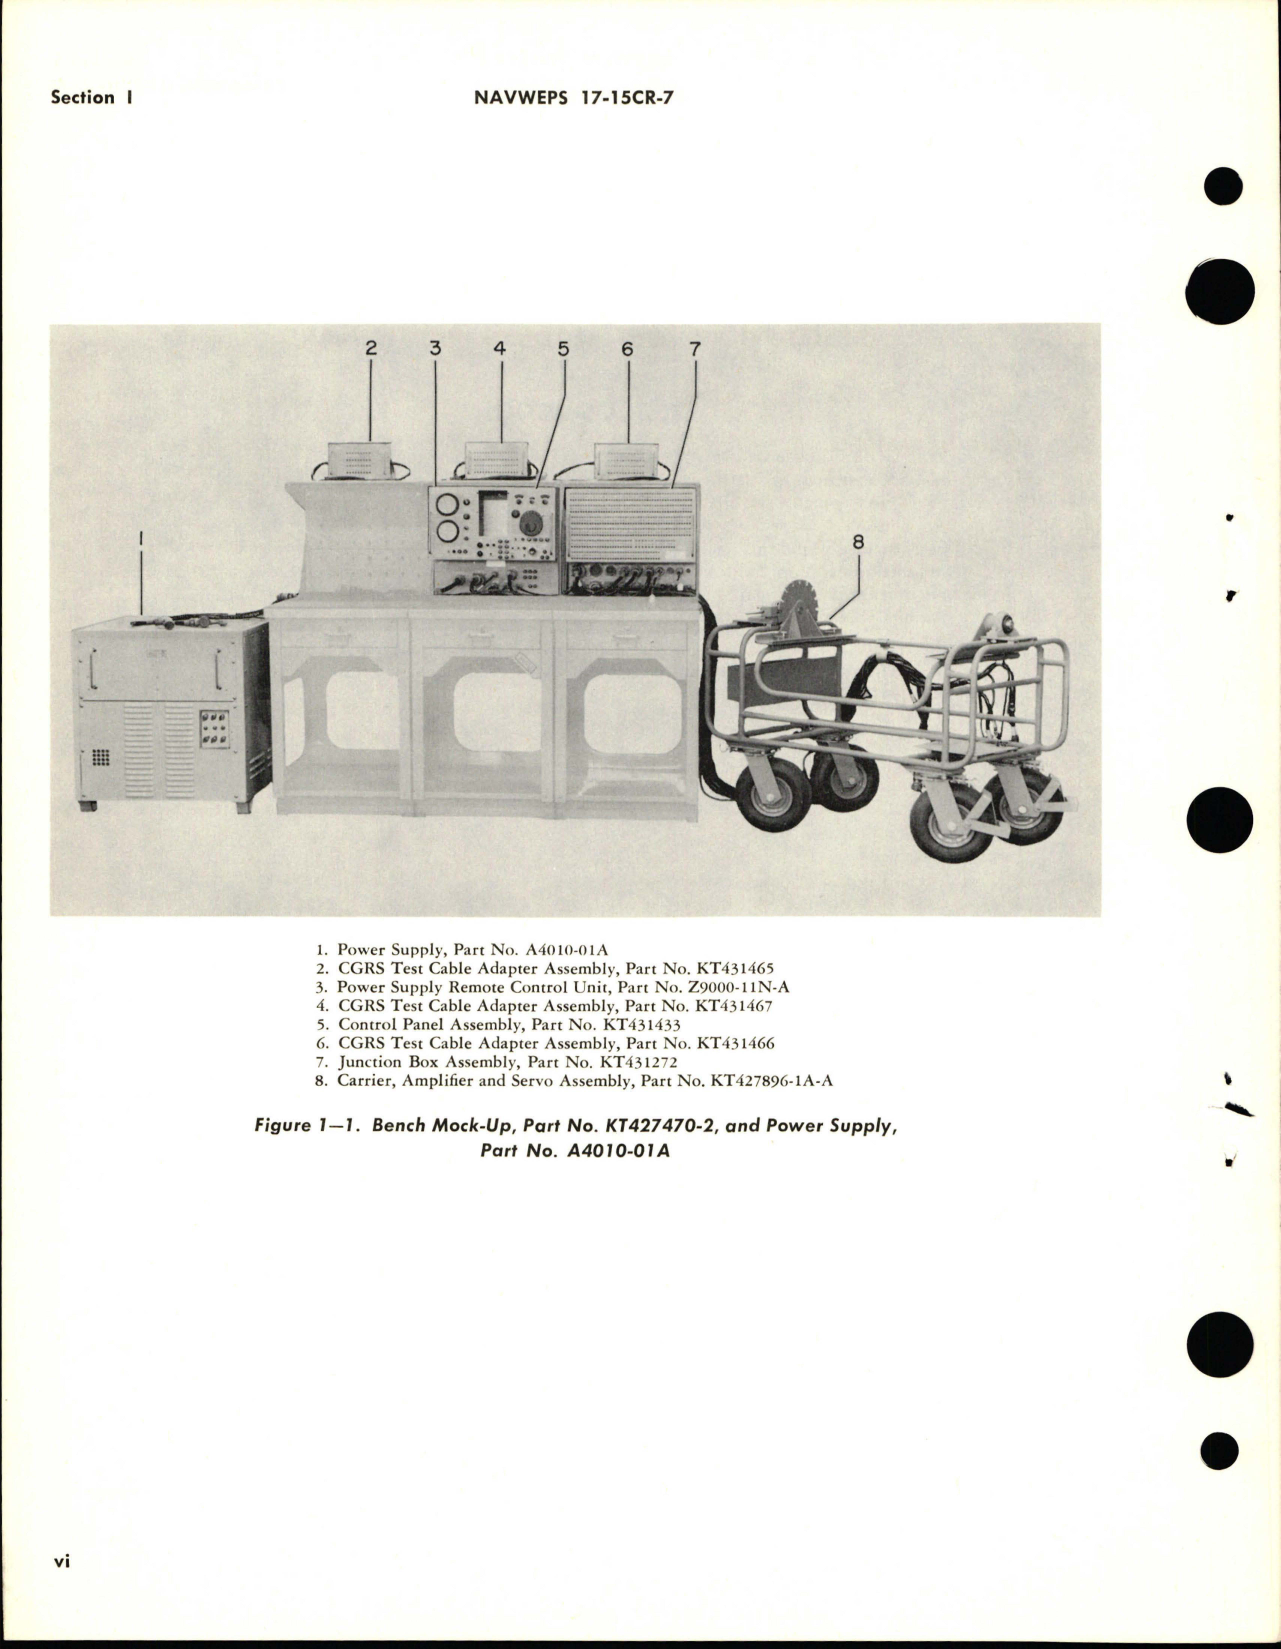 Sample page 8 from AirCorps Library document: Operation and Service Instructions with Illustrated Parts for Bench Mock Up - Part KT427470-2, and Power Supply - Part A4010-01A